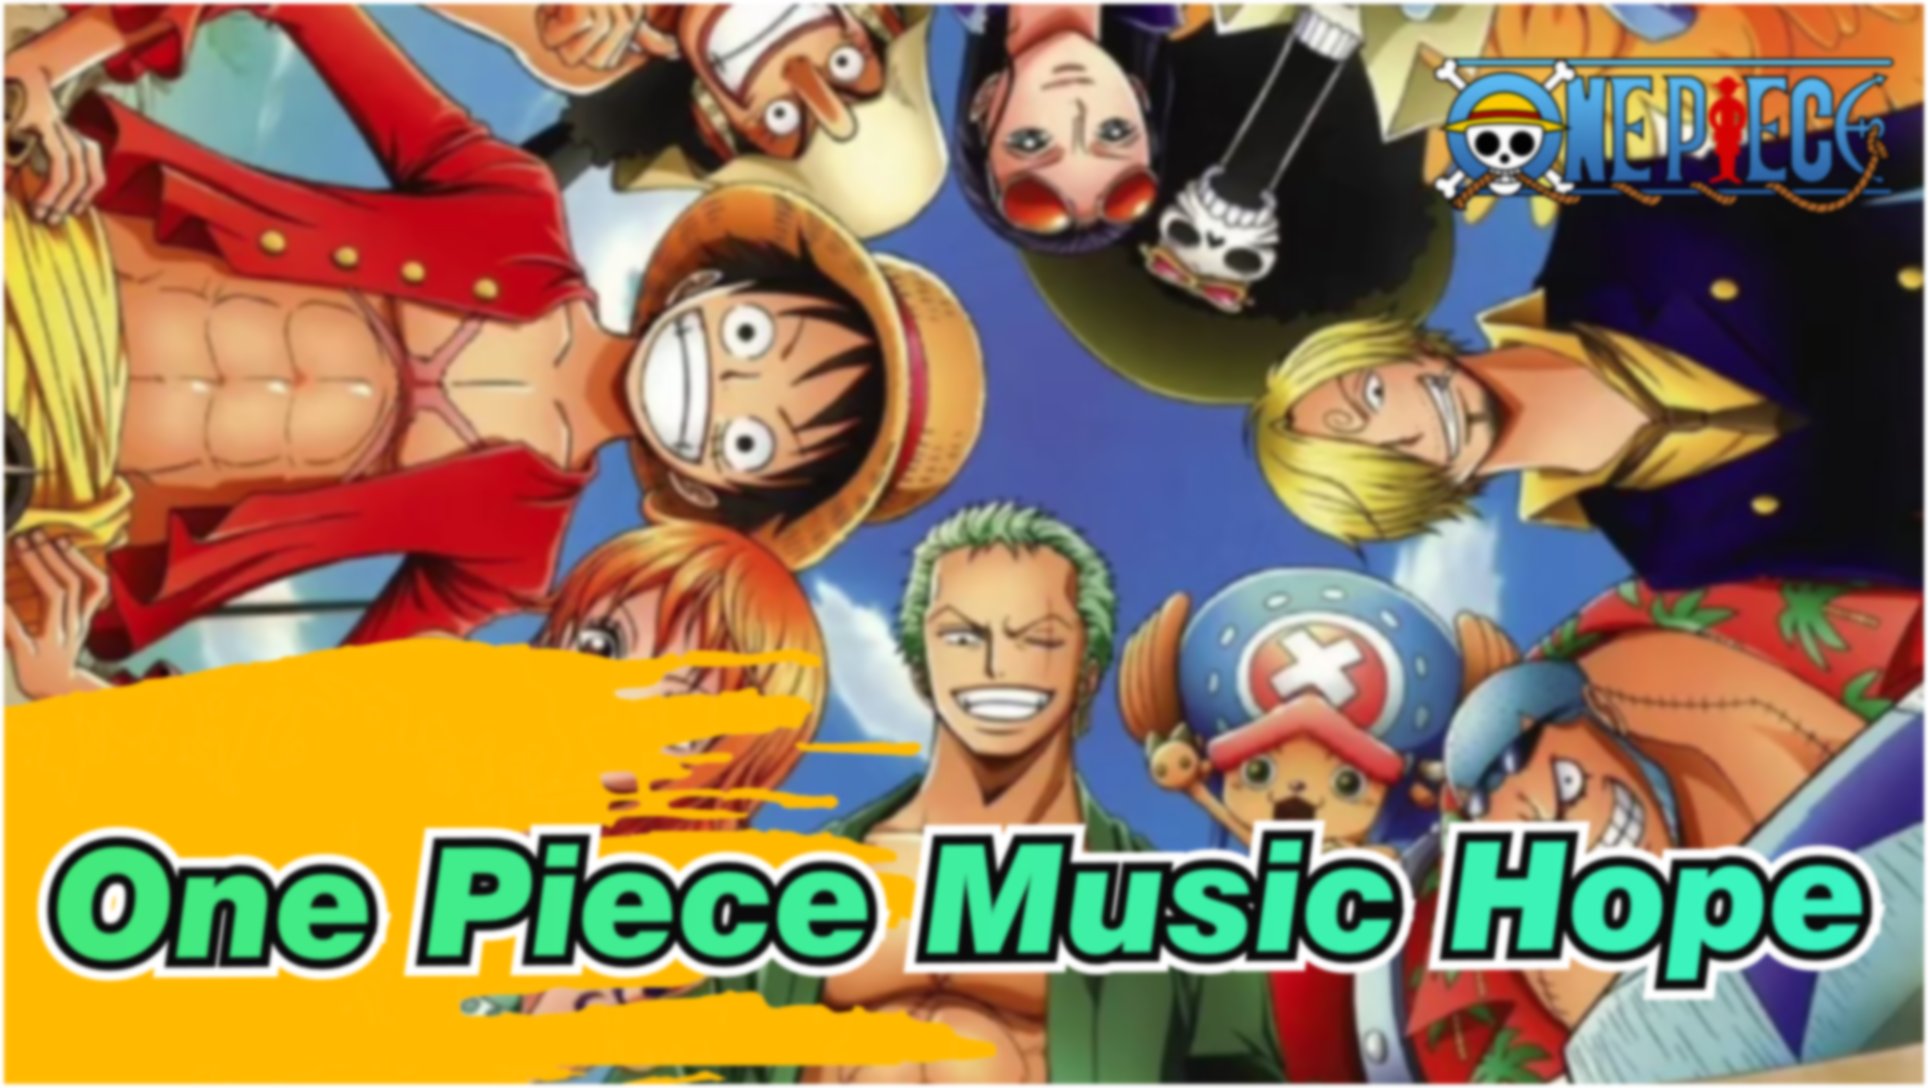 One Piece Music Op Hope By Namie Amuro Op Of Nations Arc Bilibili